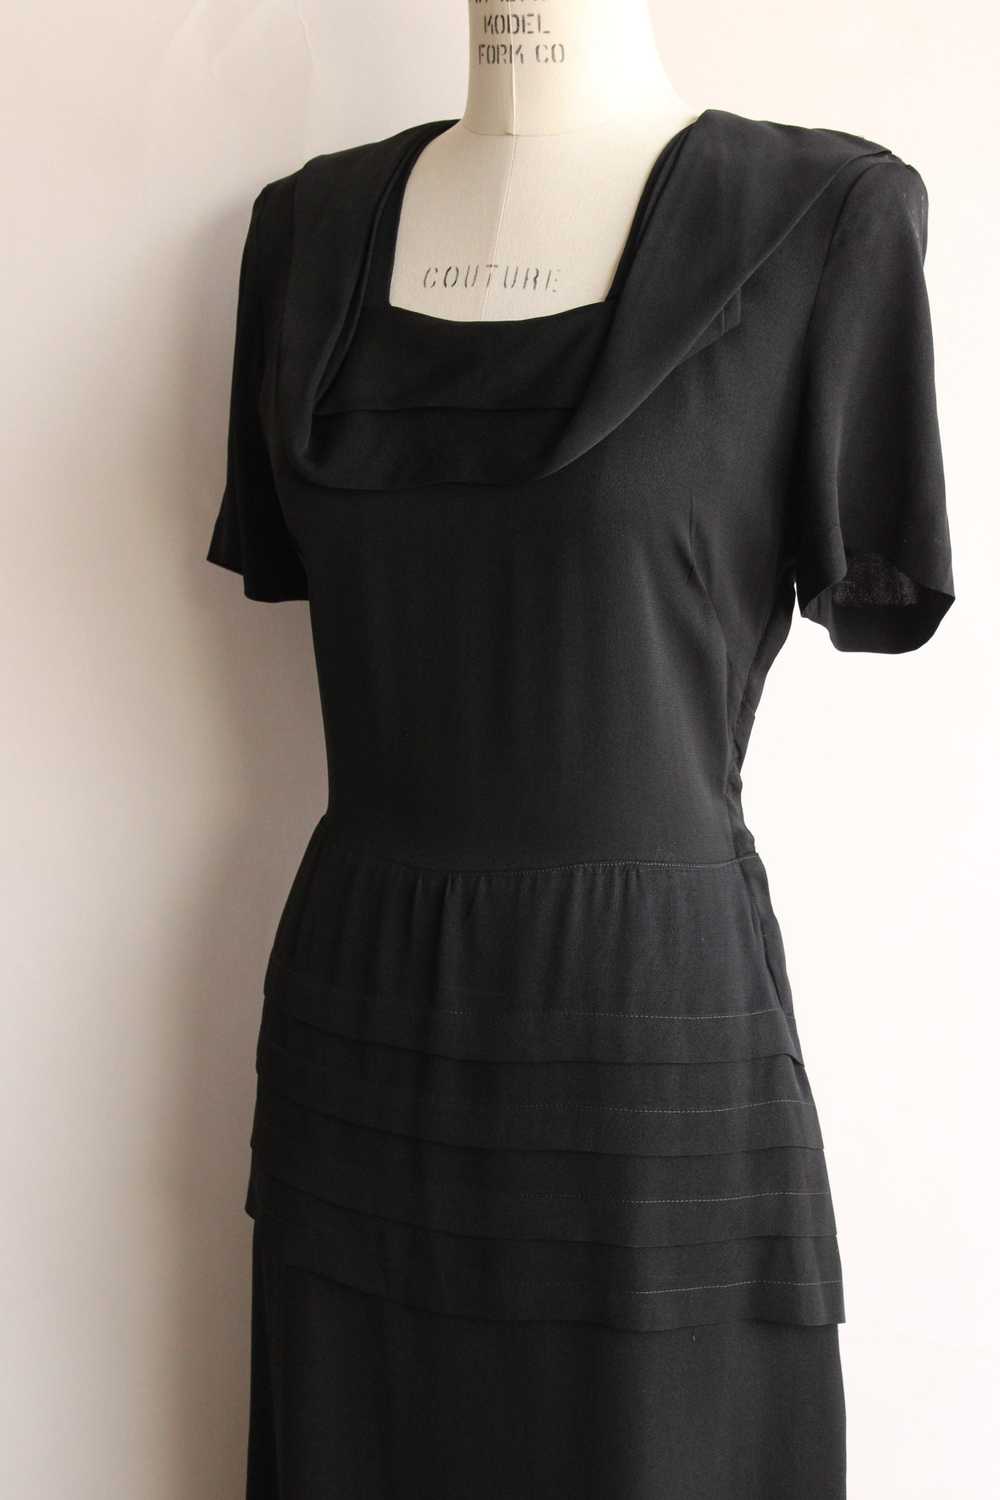 Vintage 1940s Black Rayon Dress With Square Shawl… - image 7